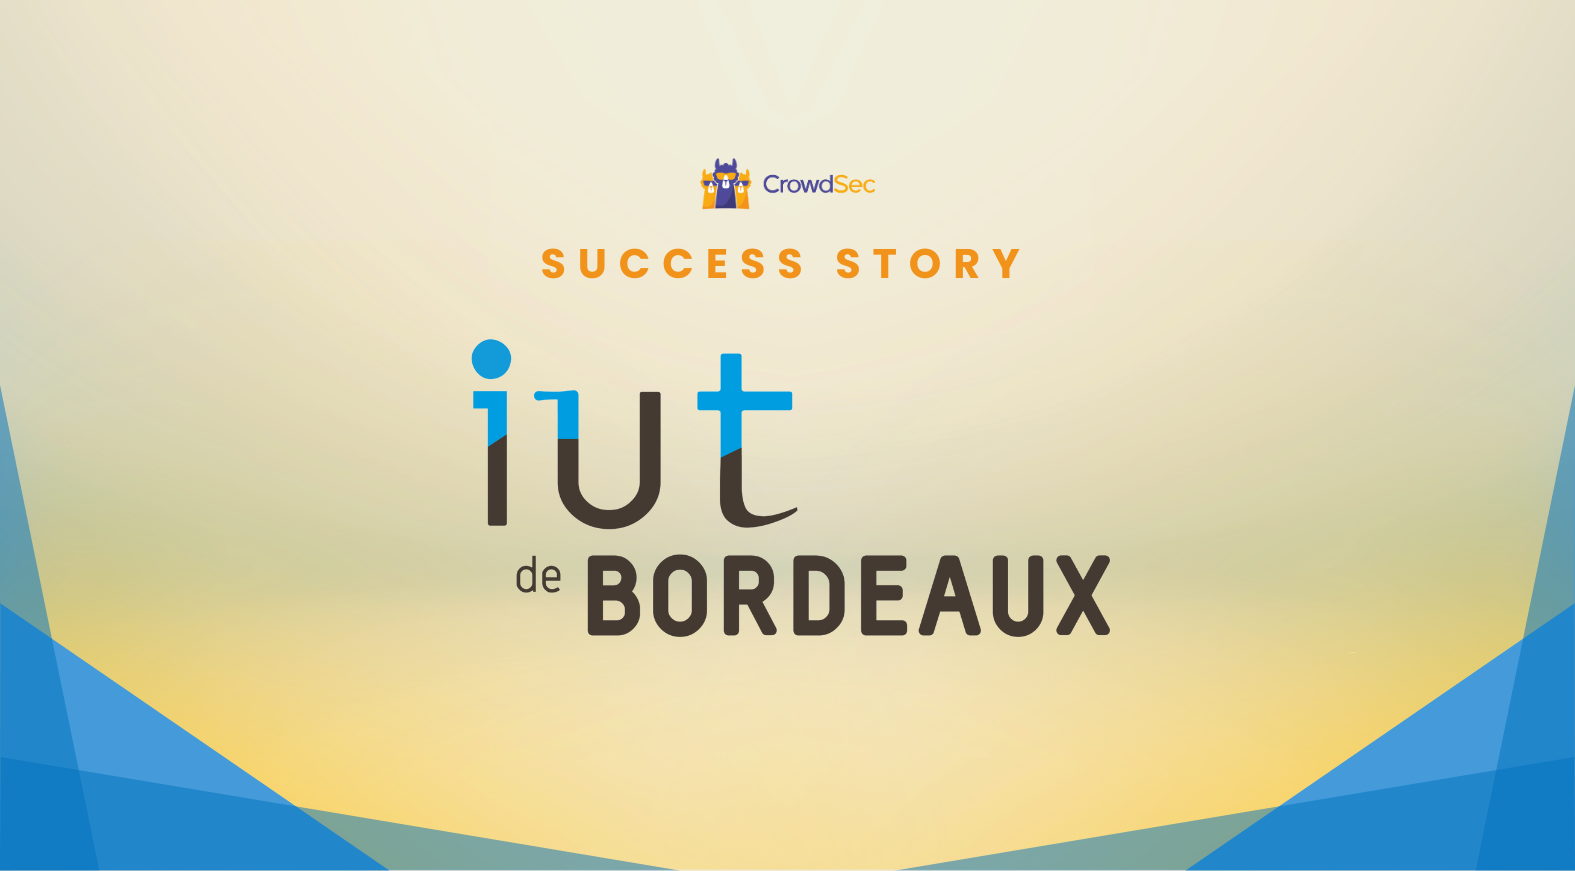 CrowdSec Protects the IUT de Bordeaux against Breach Attempts Using the Power of the Crowd